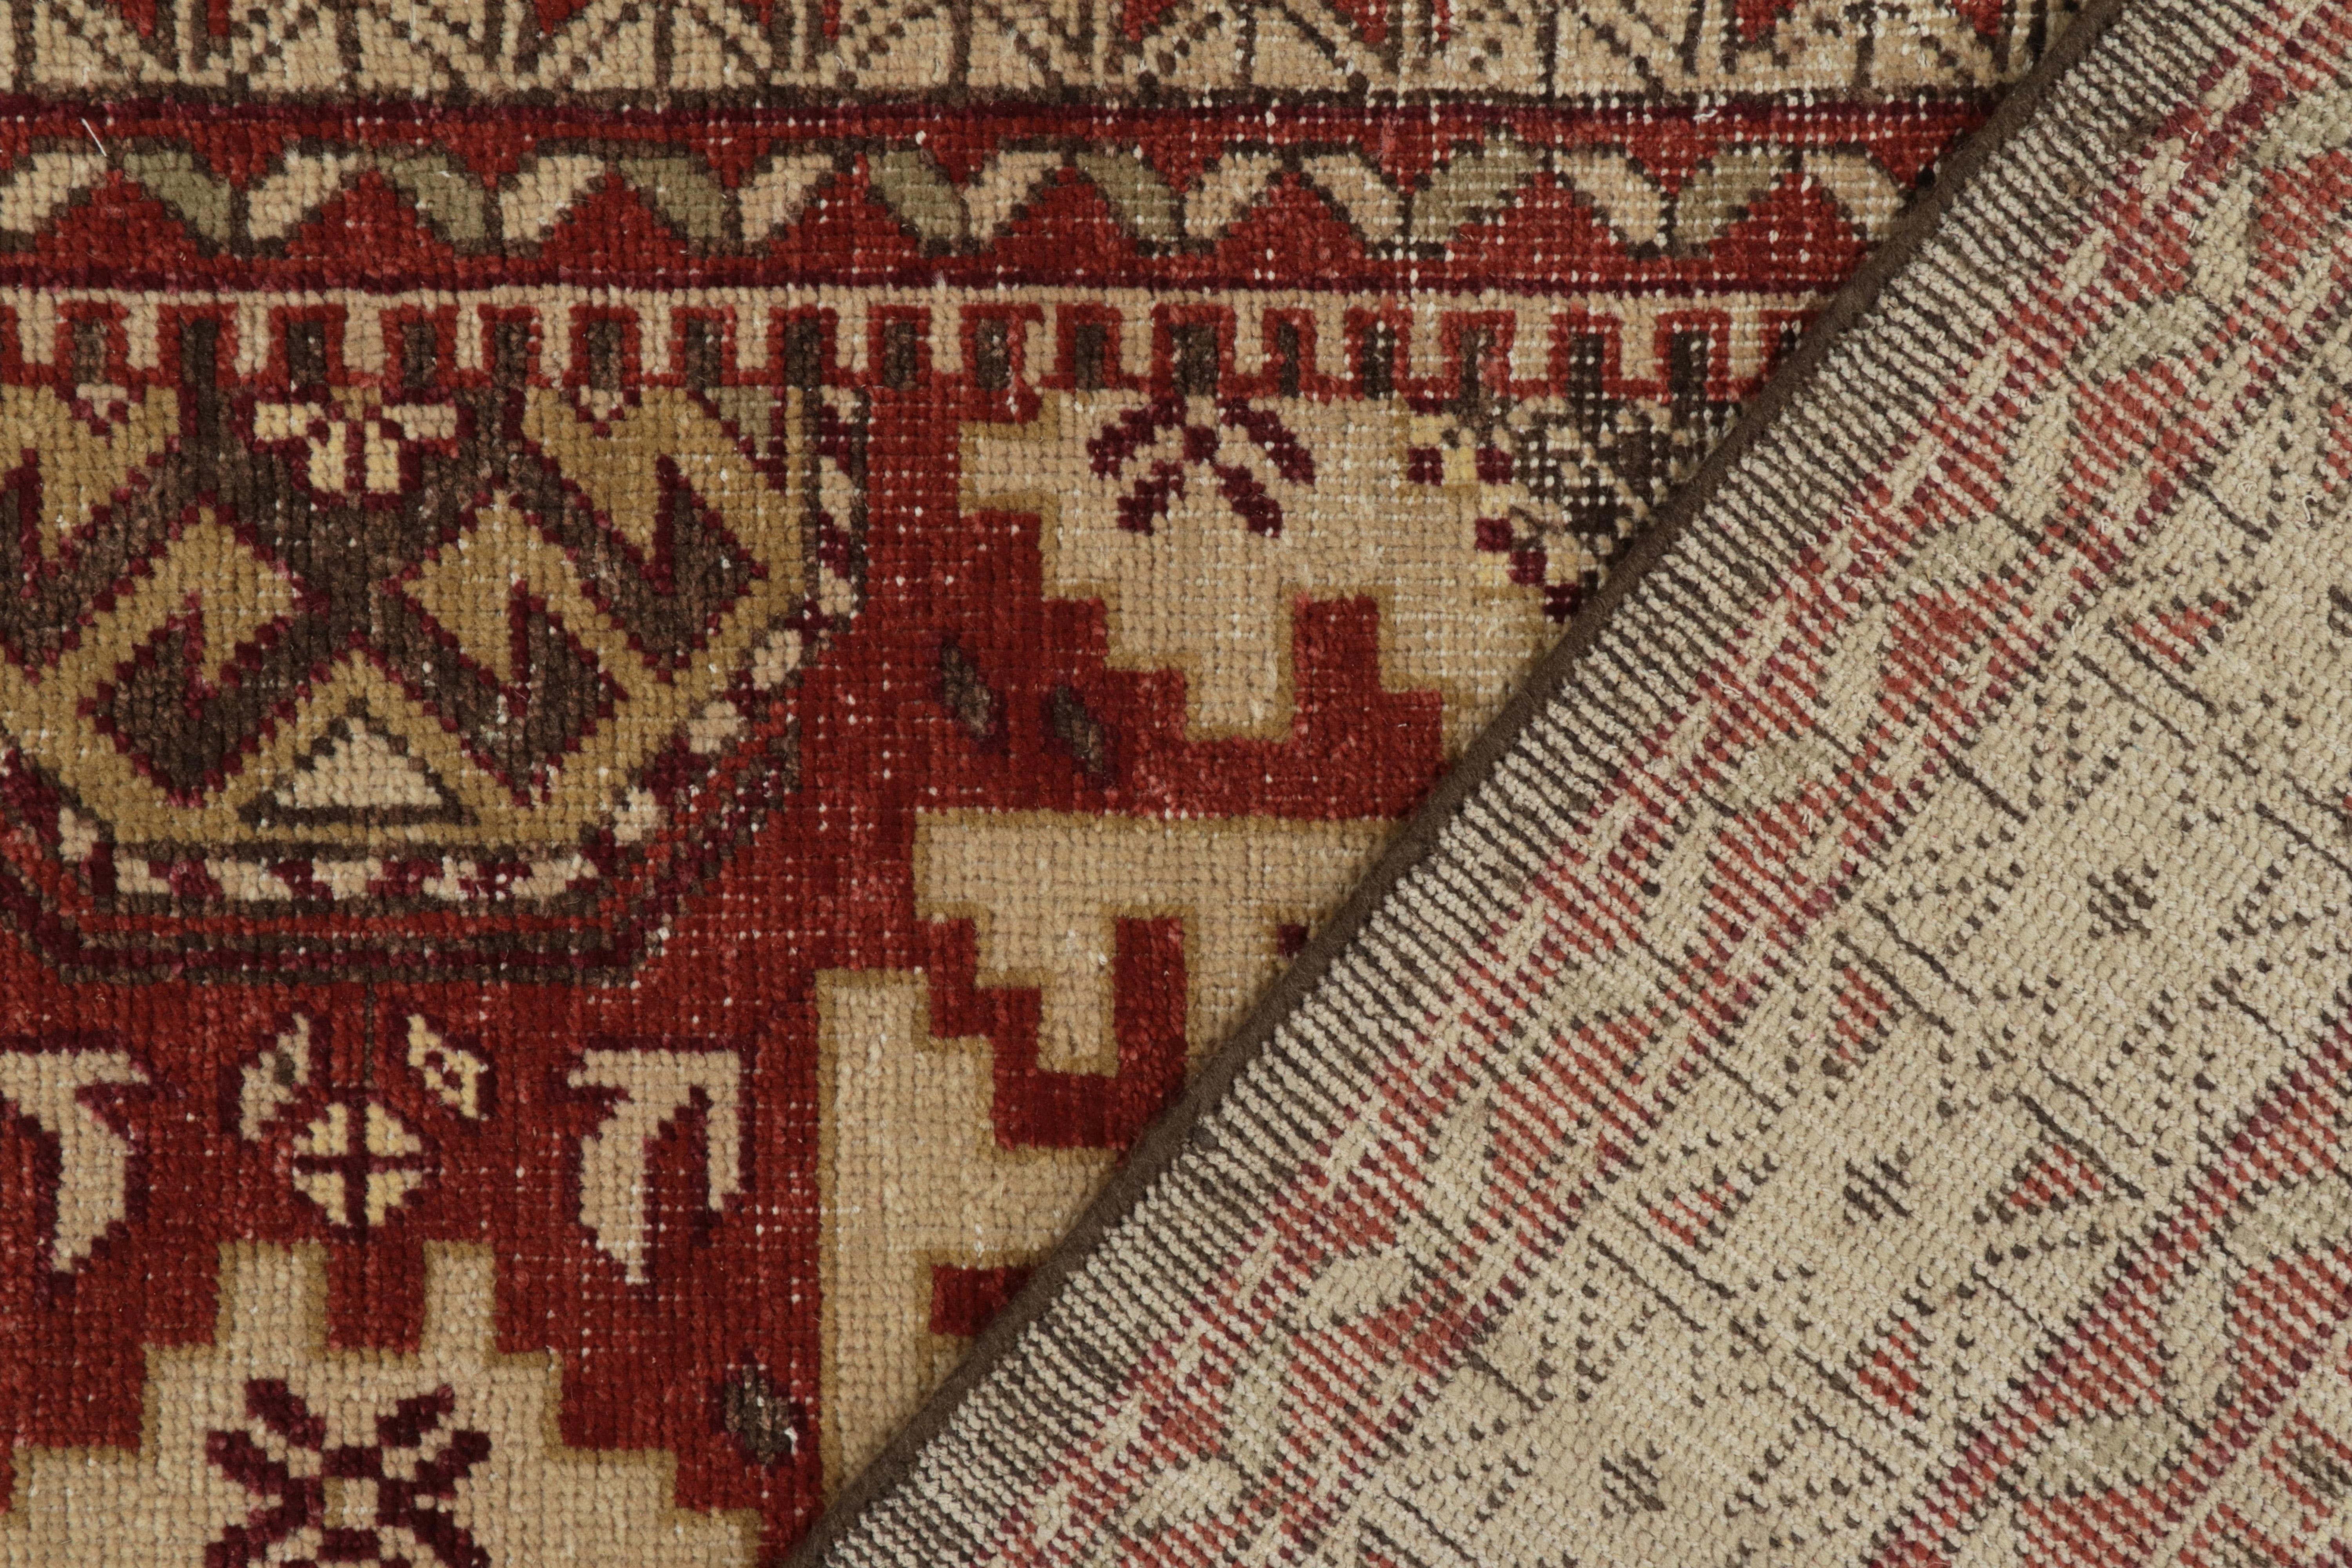 Rug & Kilim's Distressed Kuba Style Rug in Red, Beige-Brown Medallions In New Condition For Sale In Long Island City, NY